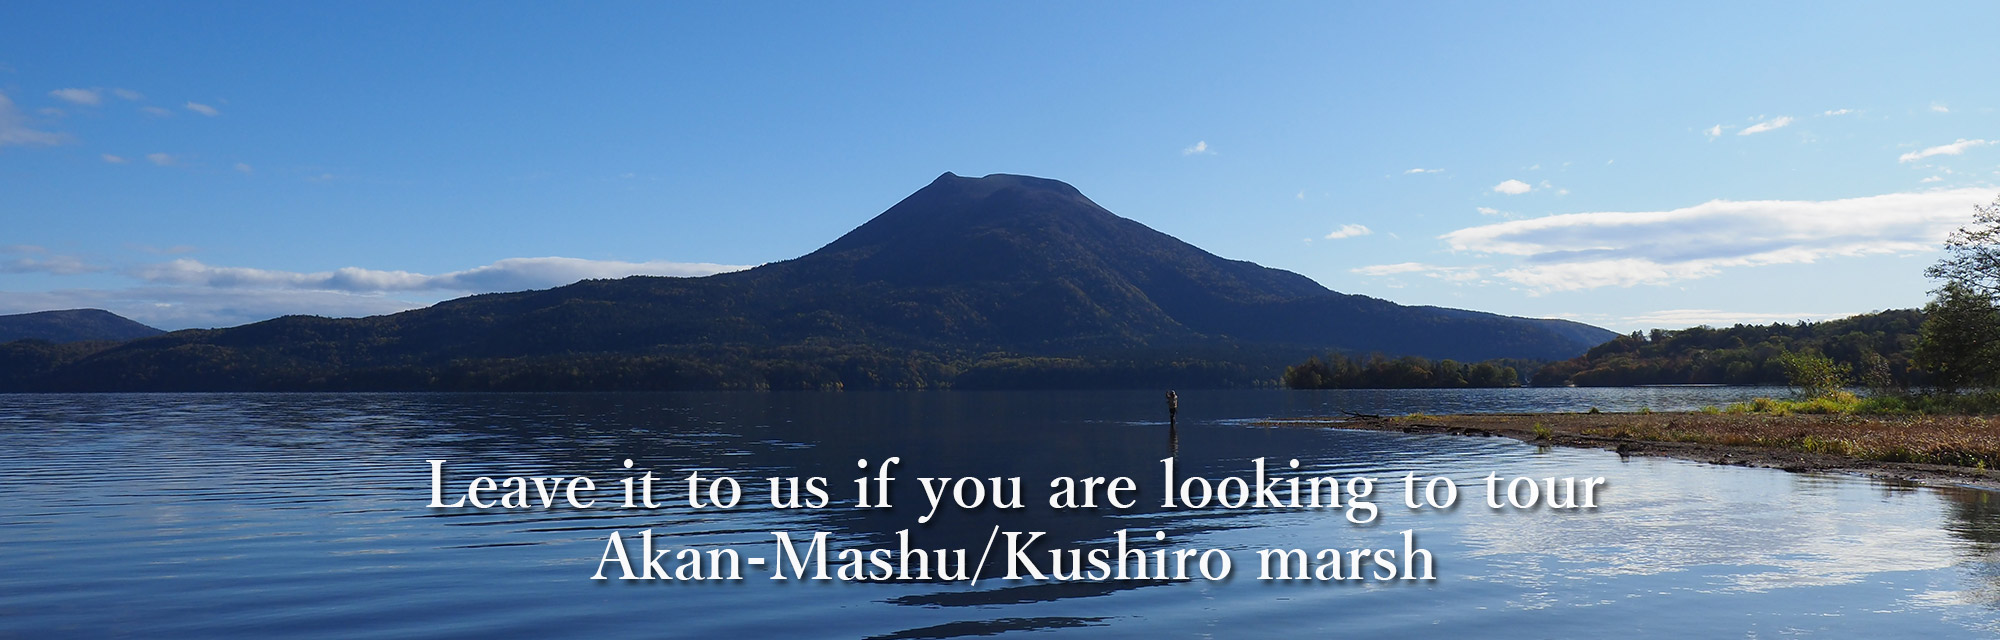 Leave it to us if you are looking to tour Akan-Mashu/Kushiro marsh